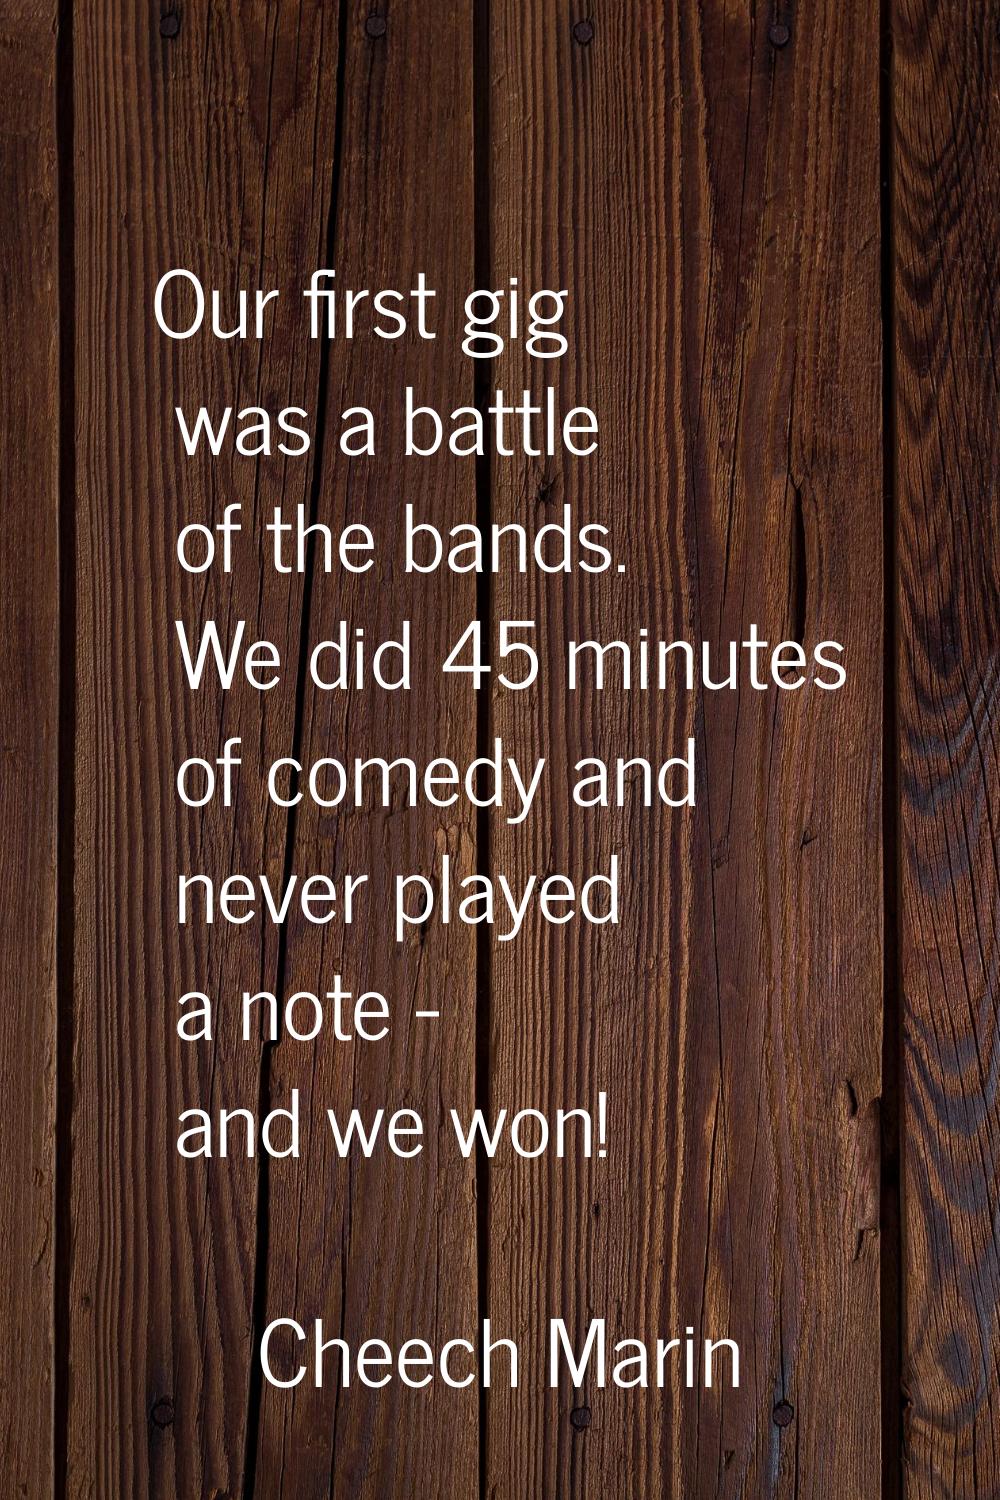 Our first gig was a battle of the bands. We did 45 minutes of comedy and never played a note - and 